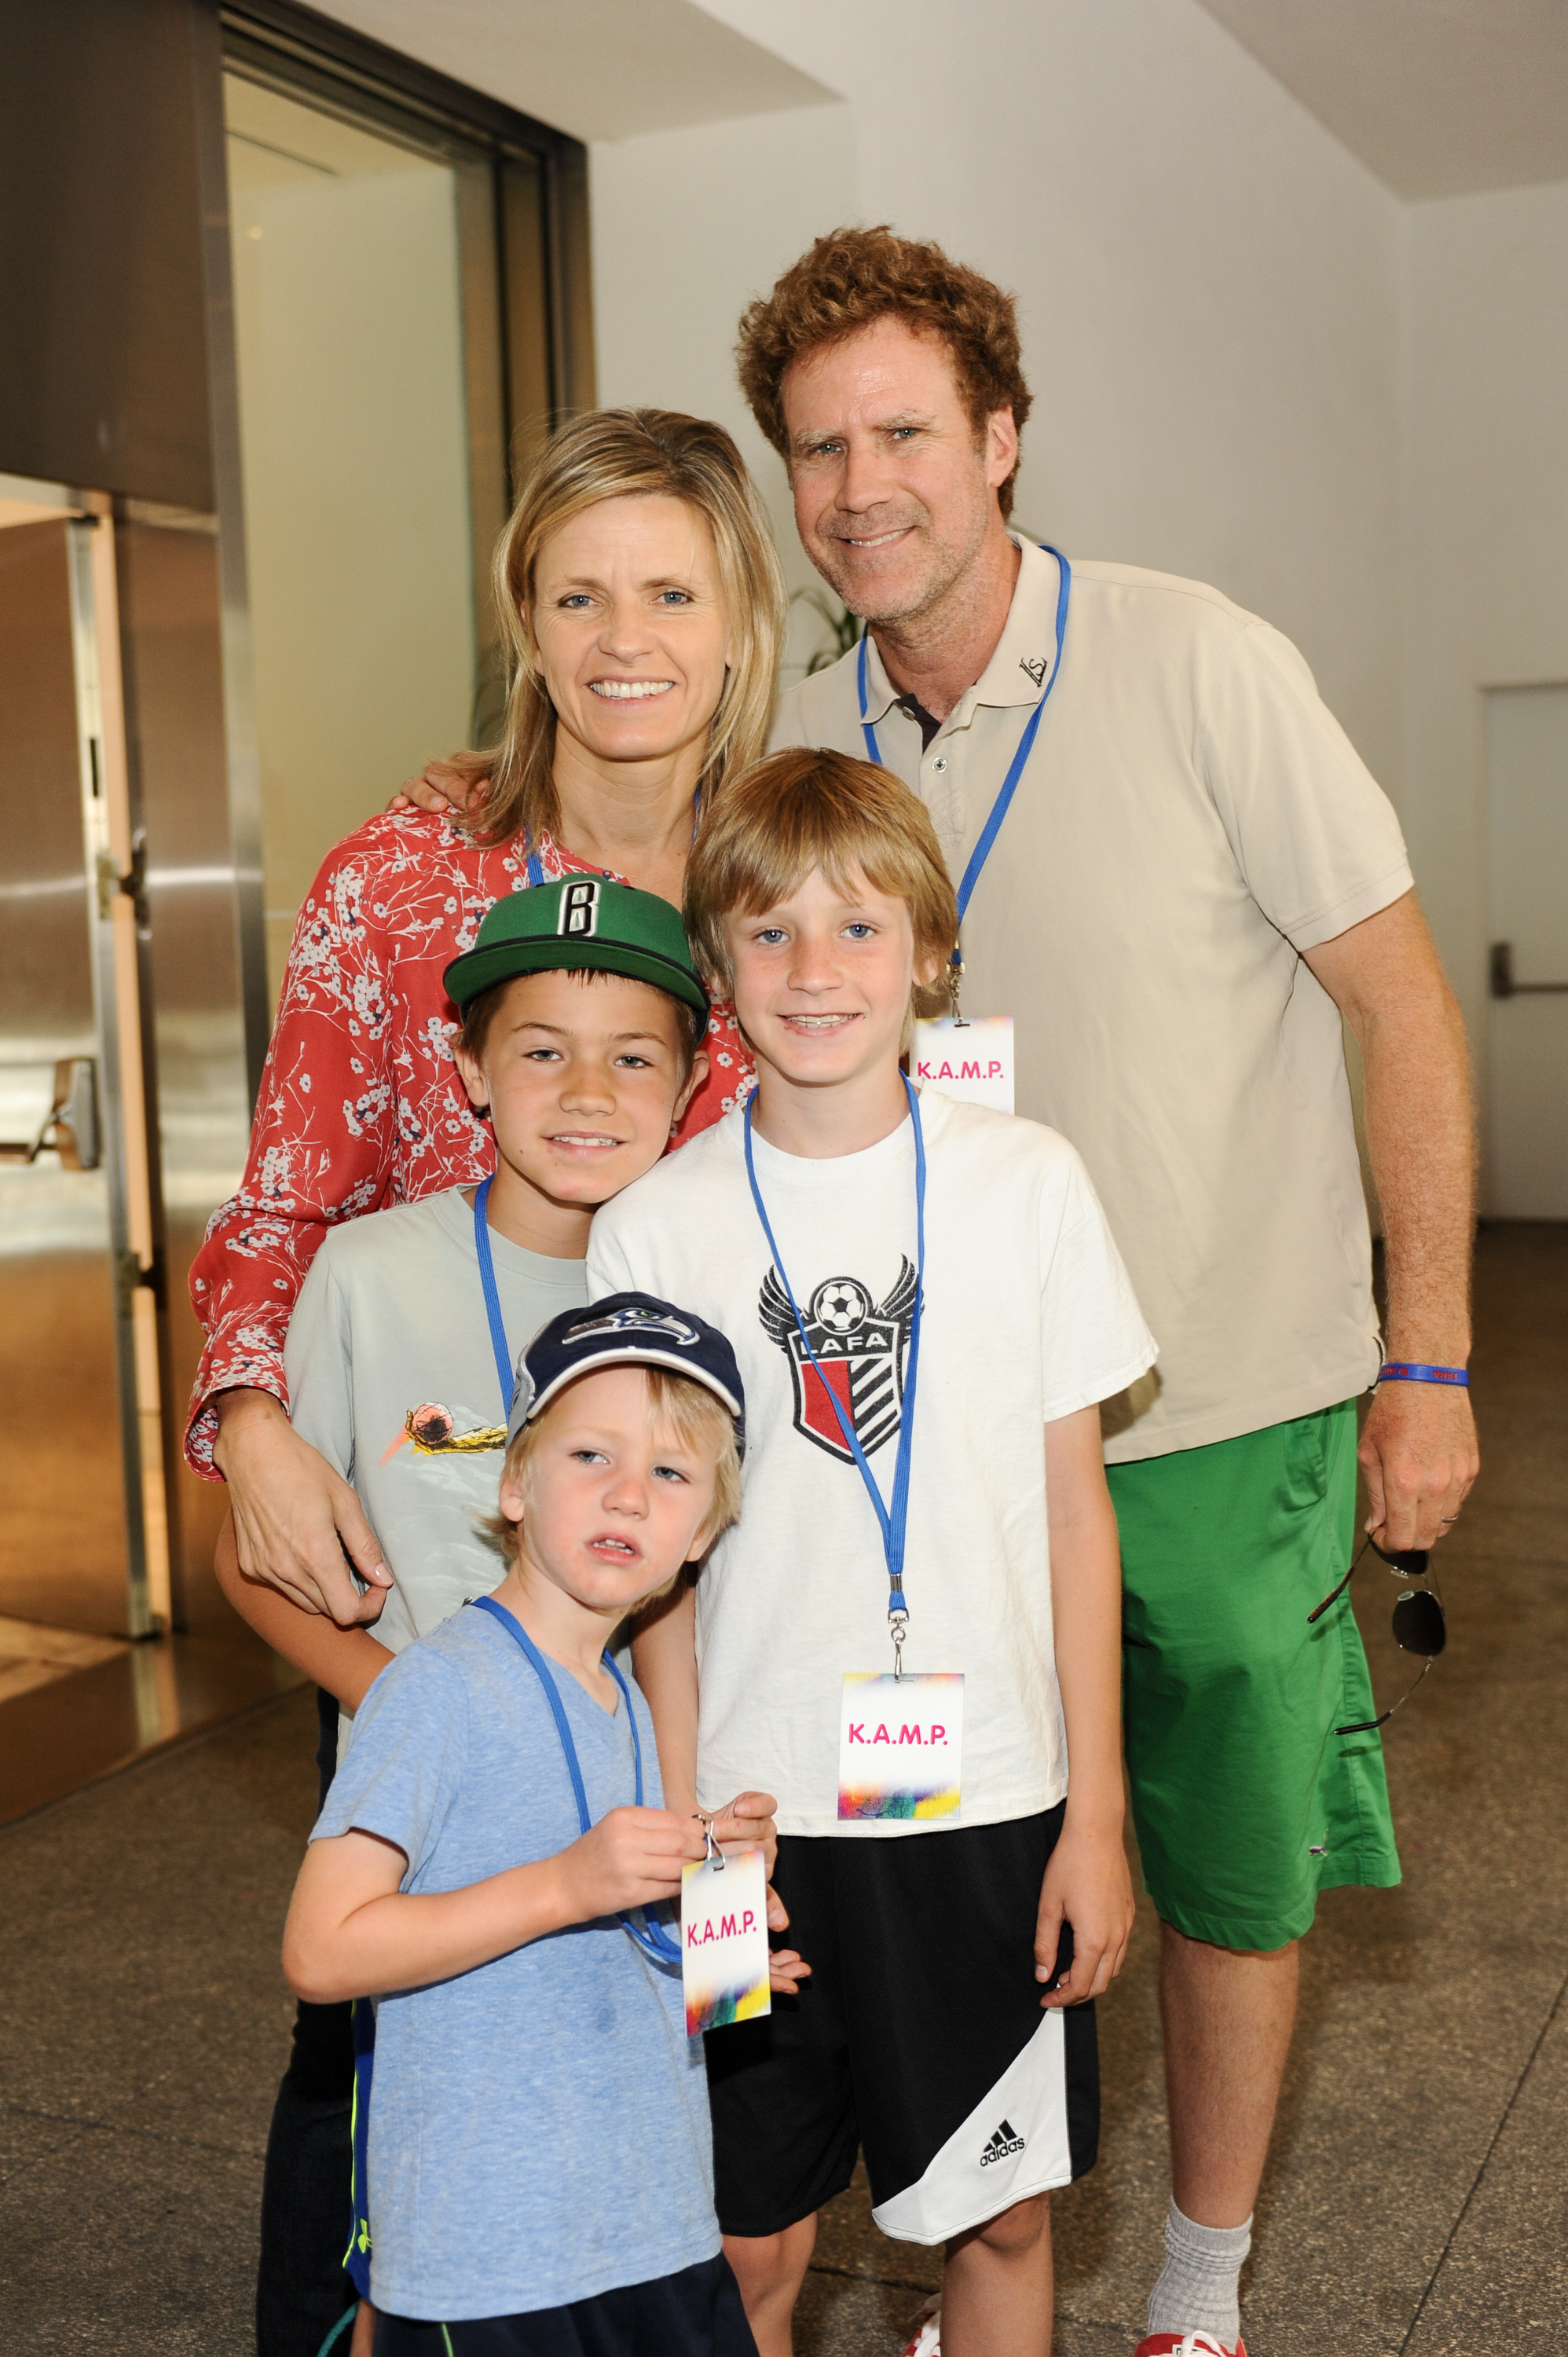 Will Ferrell and Viveca Paulin with their children Mattias, Axel and Magnus in Los Angeles in 2014 | Source: Getty Images